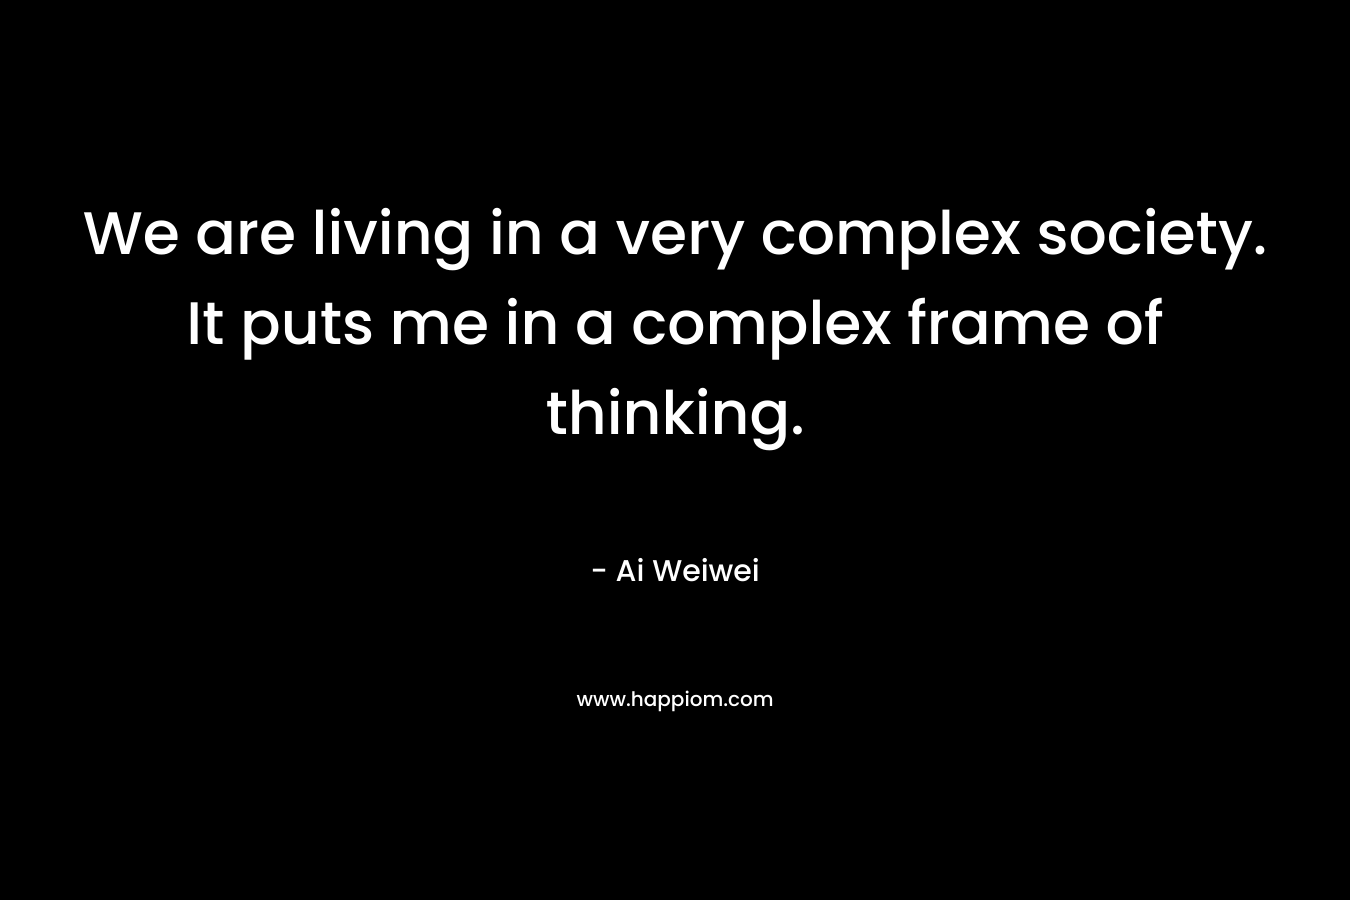 We are living in a very complex society. It puts me in a complex frame of thinking.